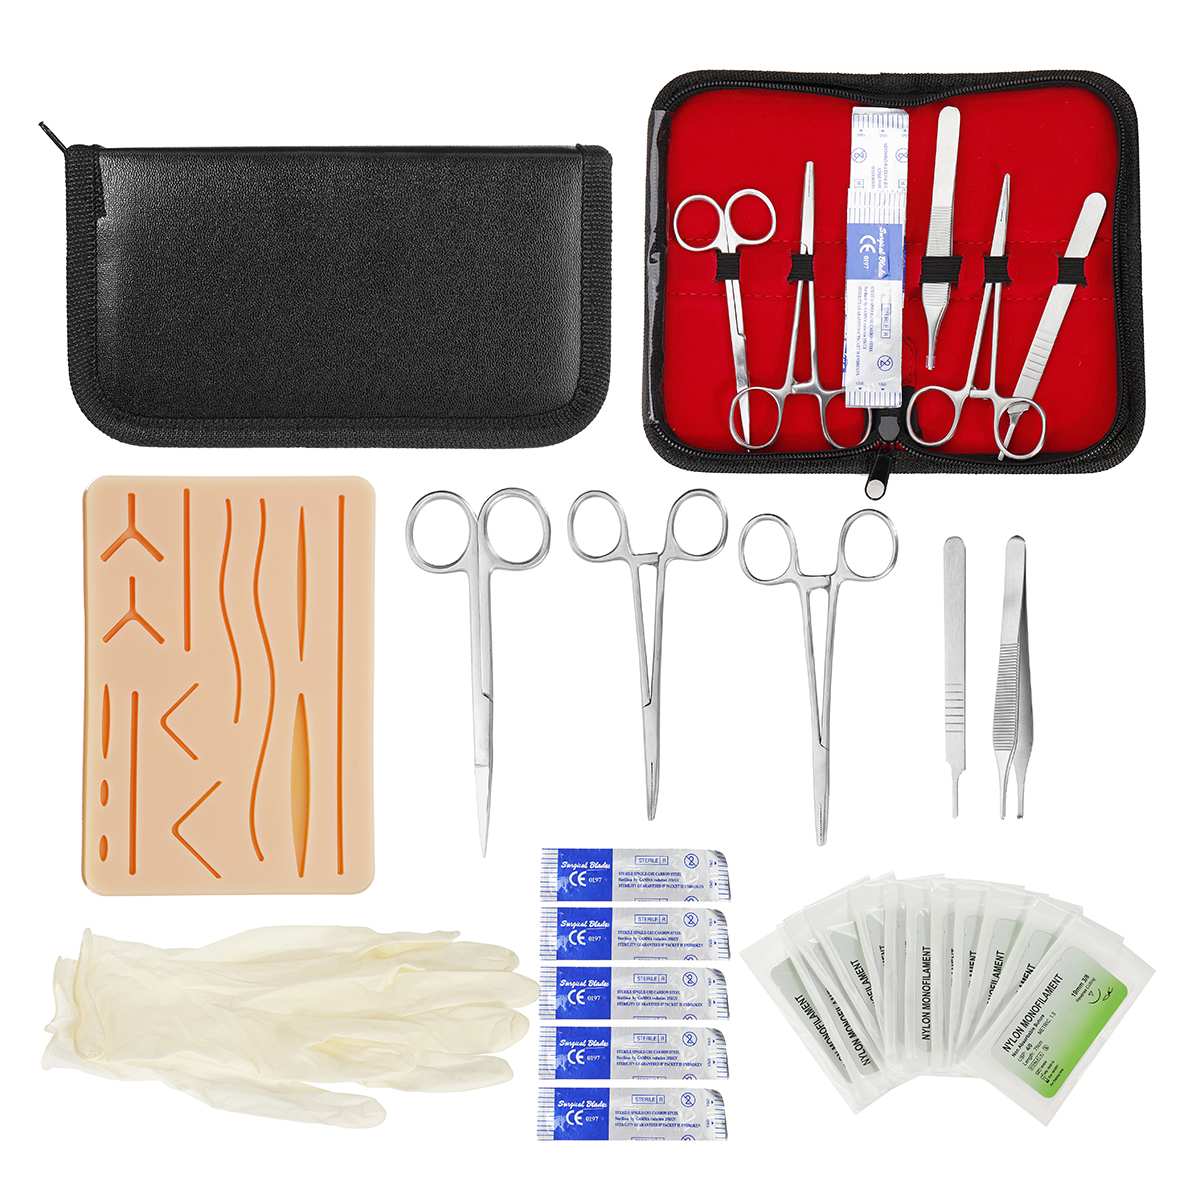 25 In 1 Medical Skin Suture Surgical Training Kit Silicone Pad Needle Scissors 19